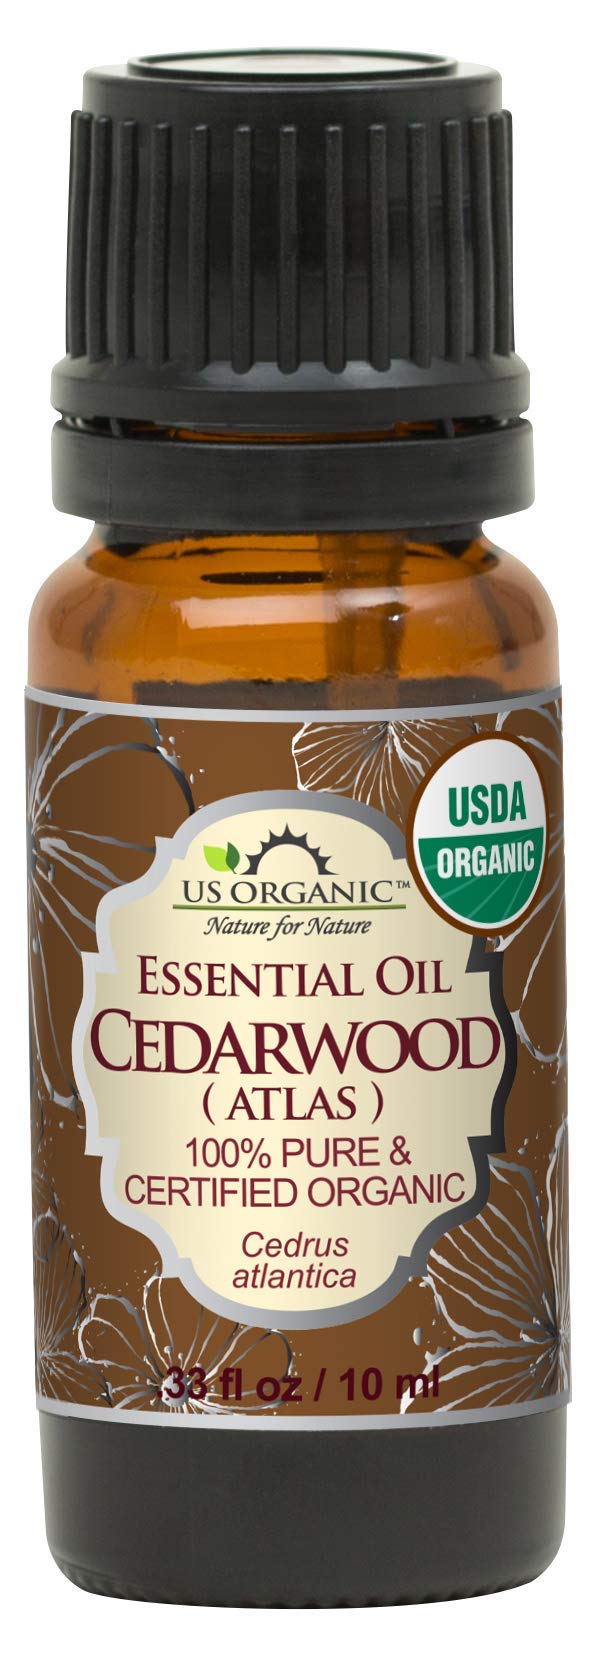 US Organic 100% Pure Cedarwood Essential Oil (Atlas) - USDA Certified Organic, Steam Distilled (More Size Variations Available) (10 ml / .33 fl oz)